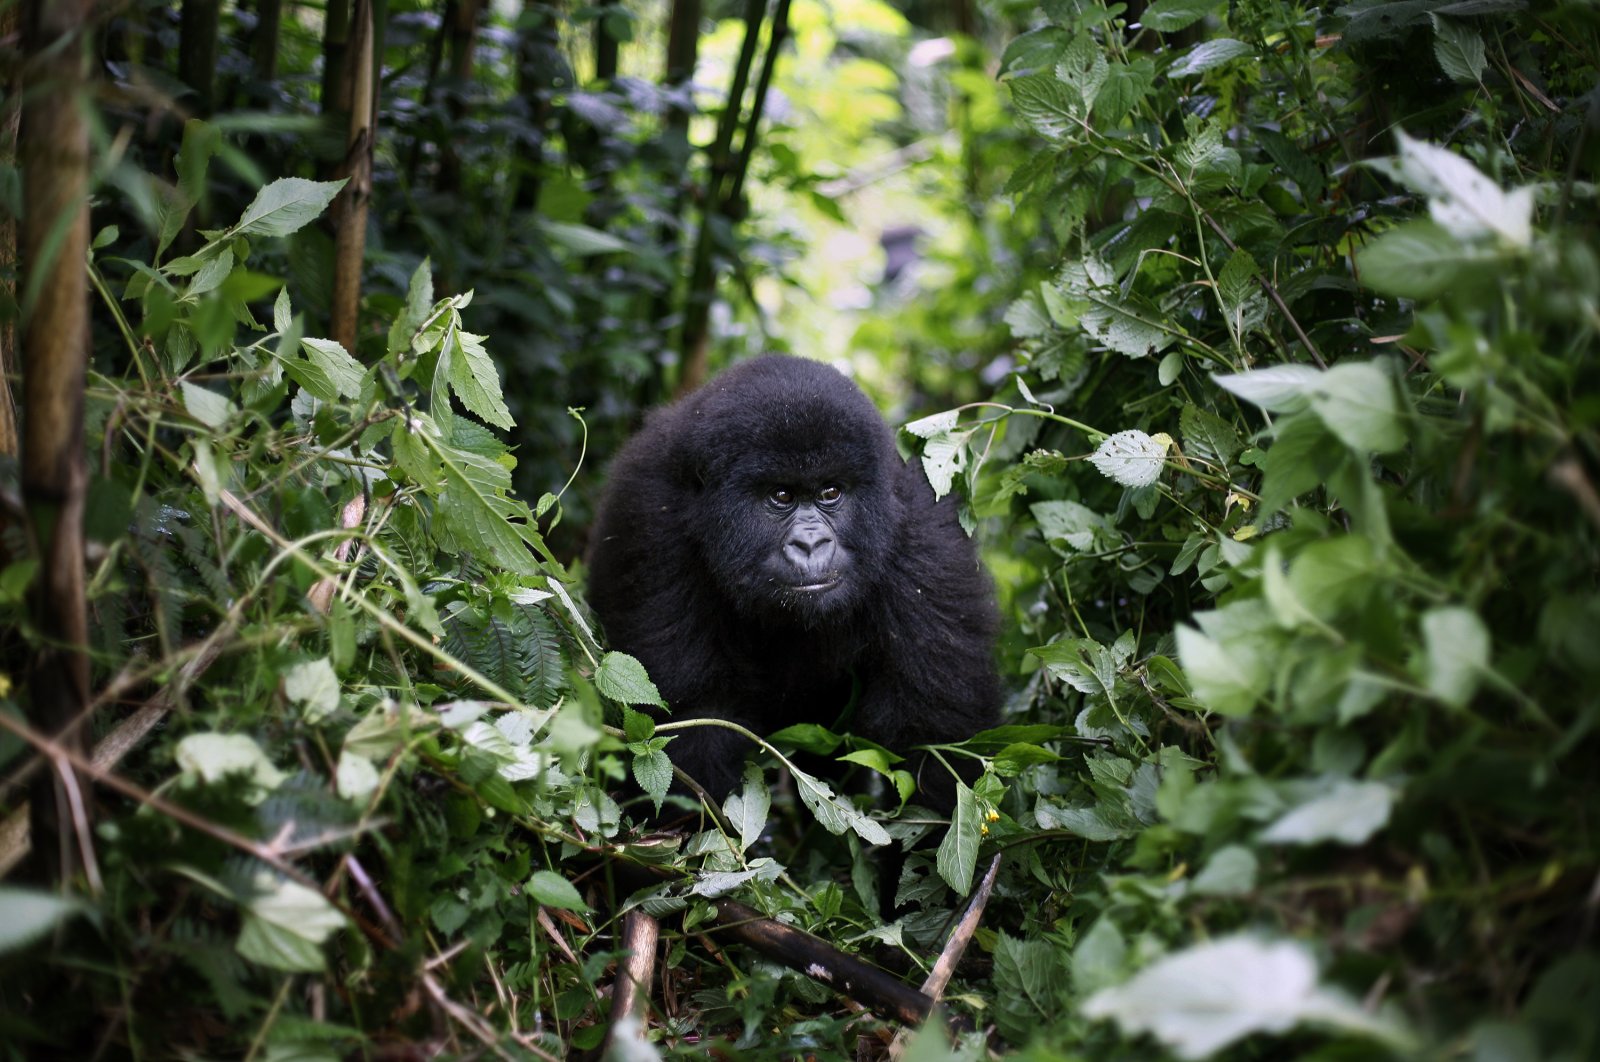 In this photo taken Dec. 11 2012, a young mountain gorilla is seen in the Virunga National Park in eastern Congo. (AP Photo)